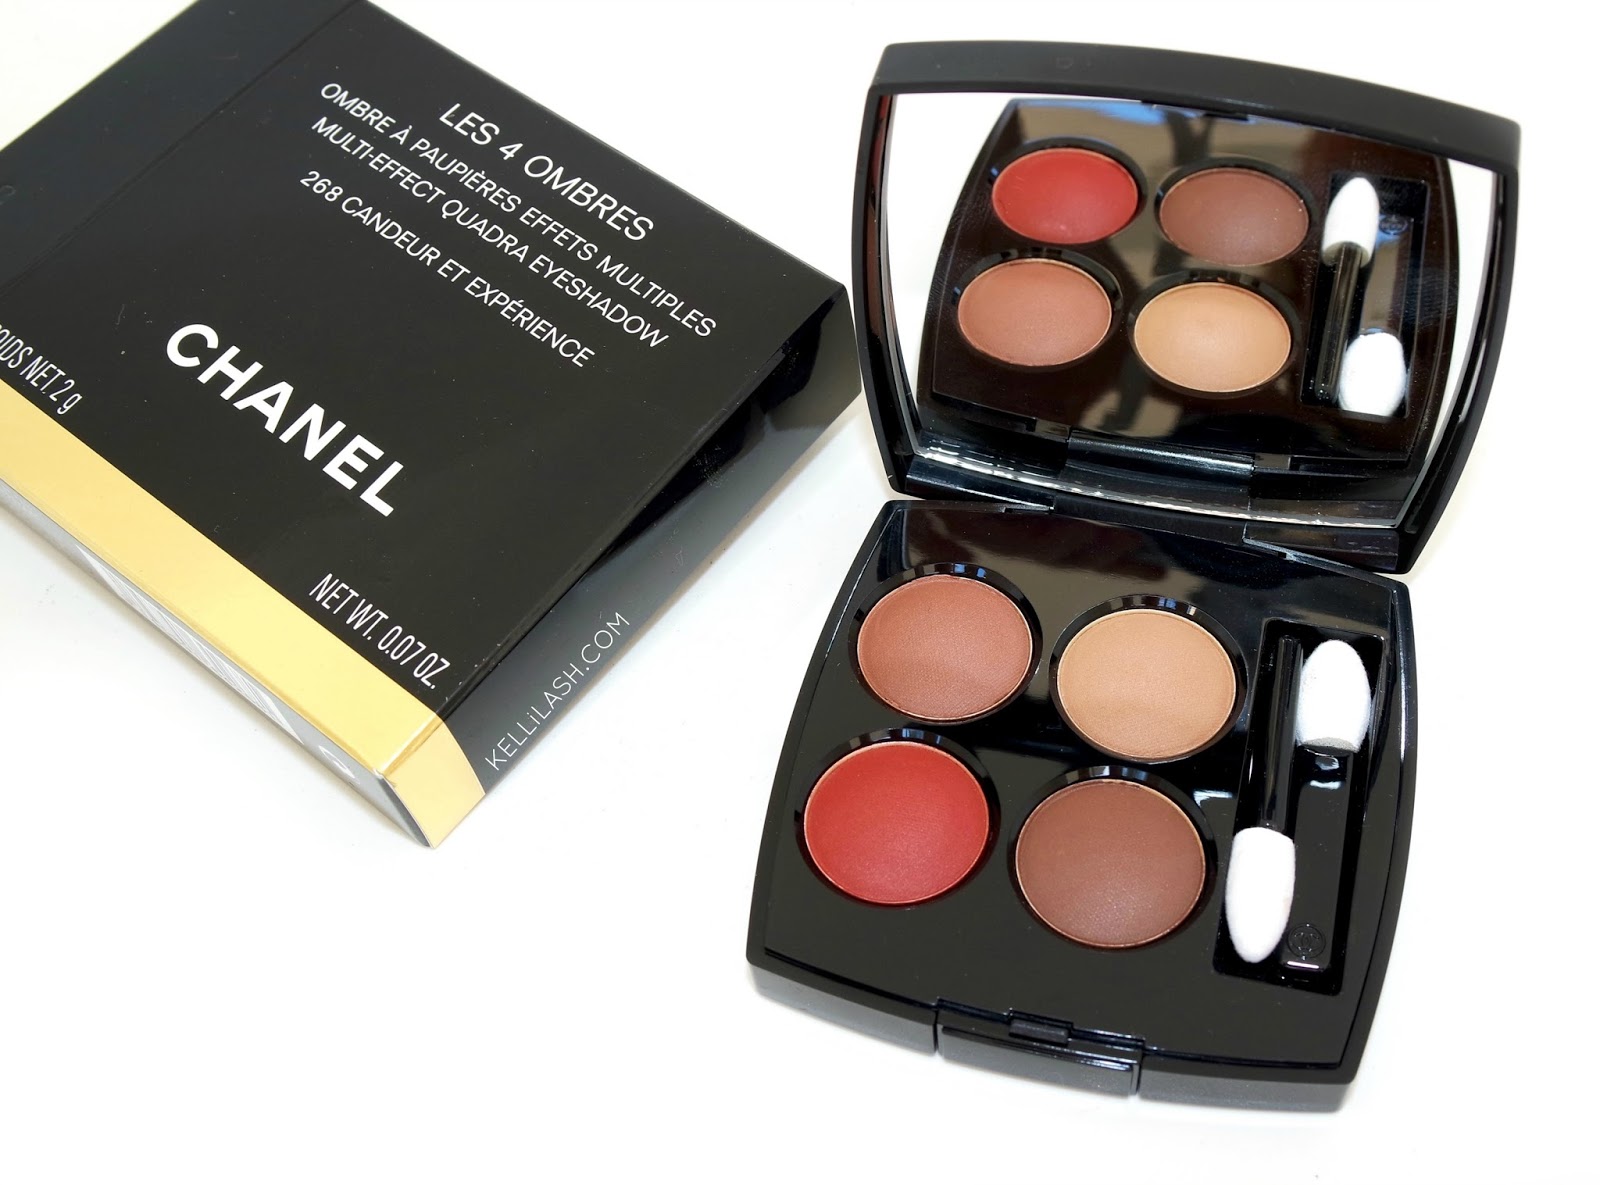 Chanel Candeur et Experience (268) Les 4 Ombres Multi-Effect Quadra  Eyeshadow Review & Swatches